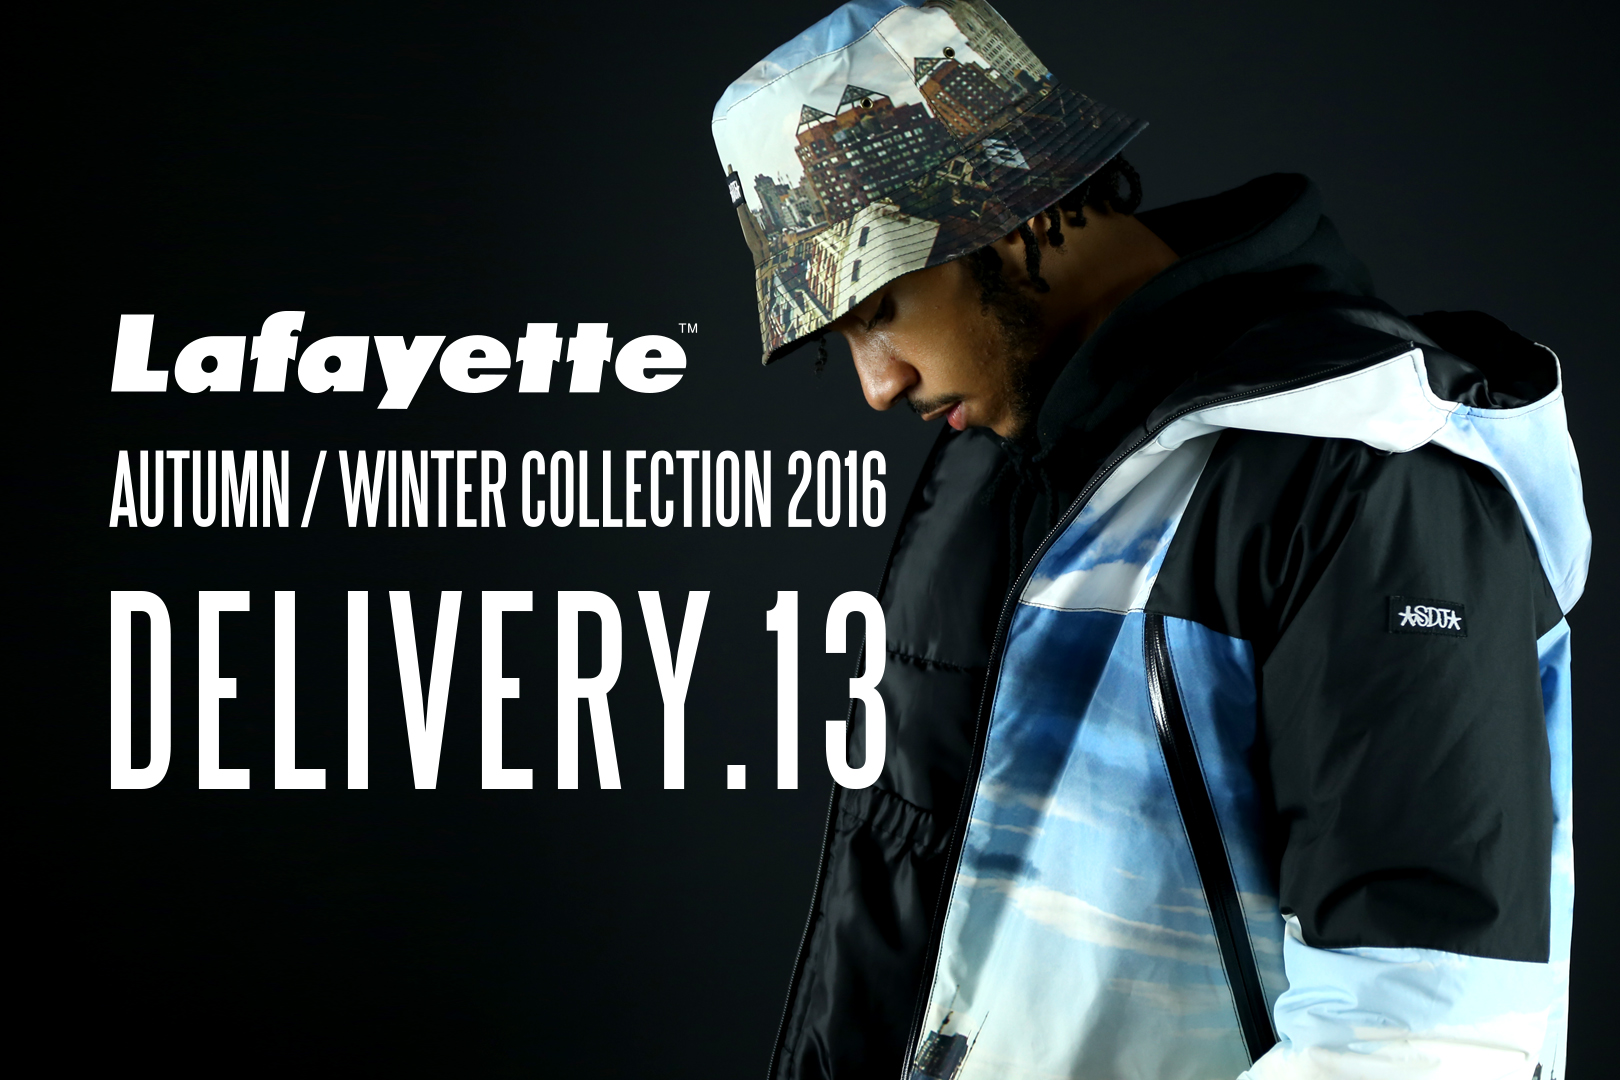 Lafayette 2016 AUTUMN/WINTER COLLECTION – DELIVERY.13